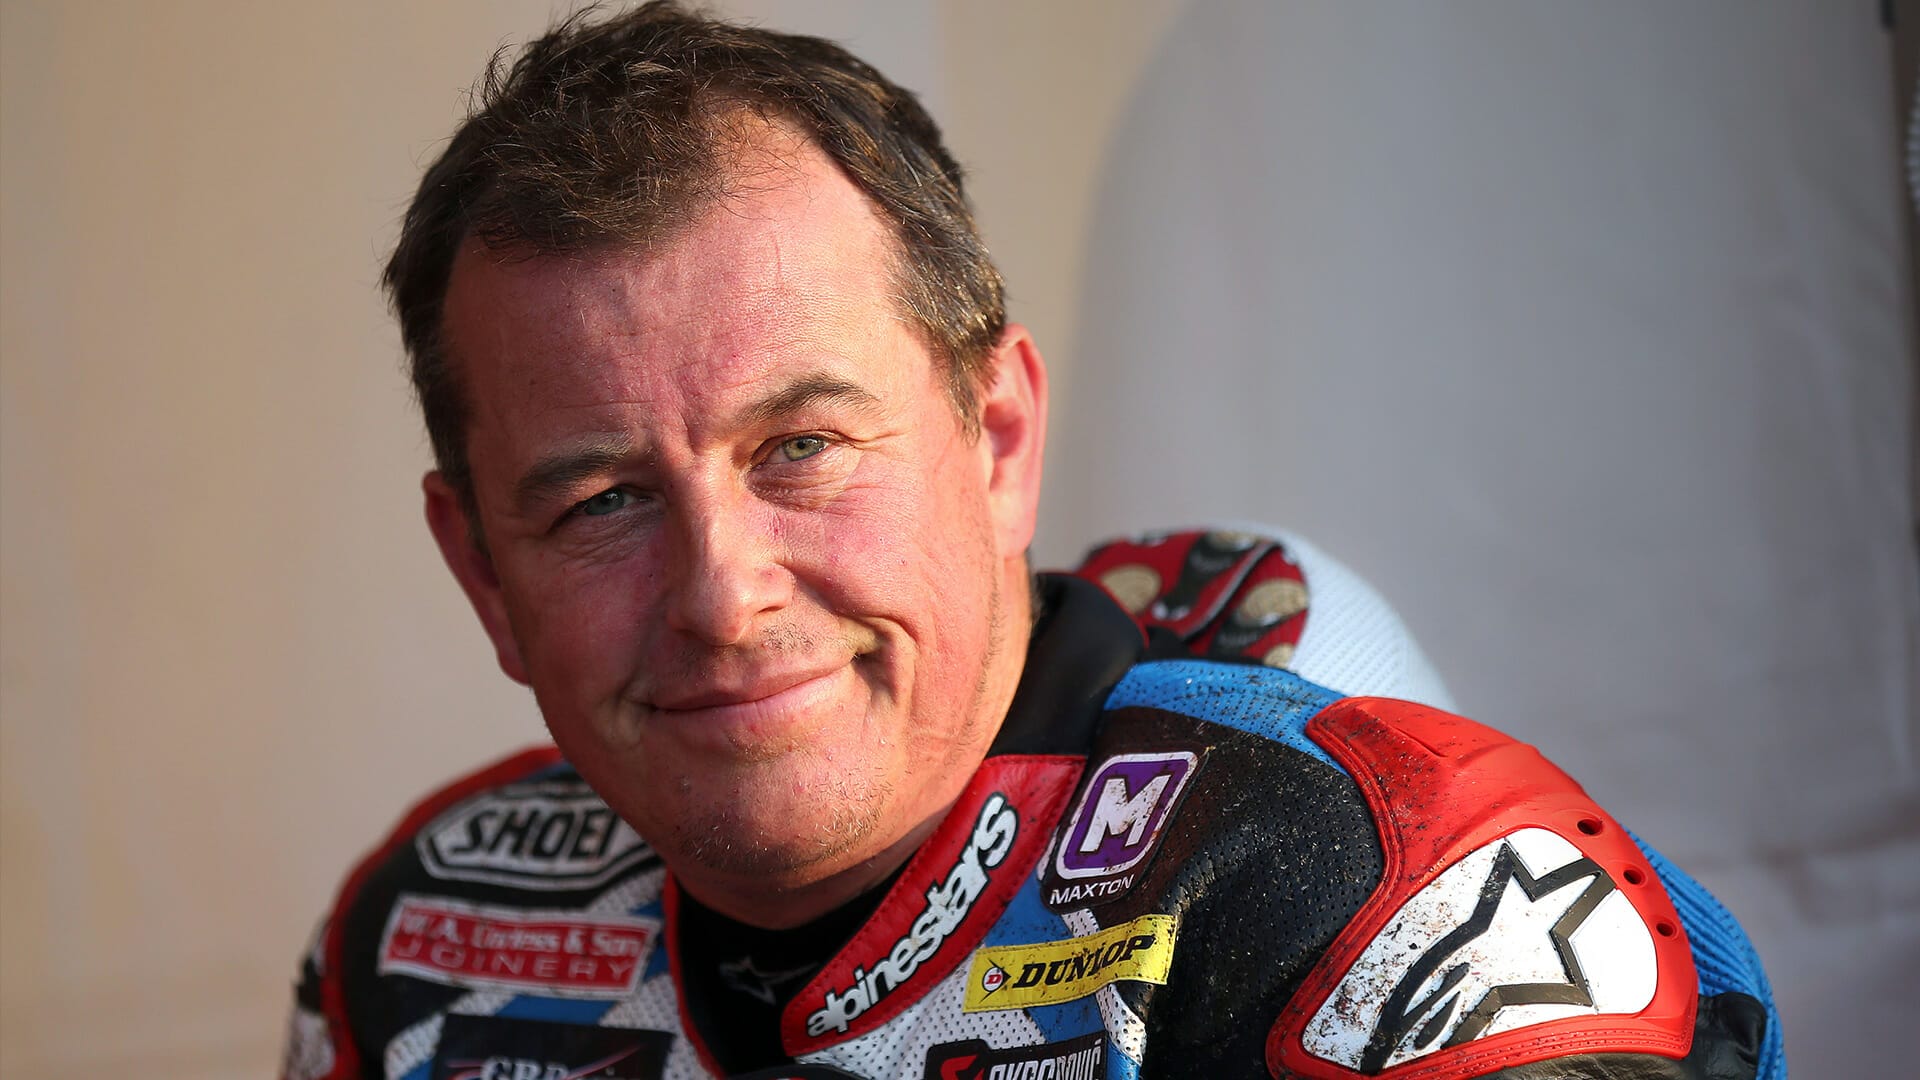 John McGuinness prepares for the TT 2022
- also in the MOTORCYCLES.NEWS APP